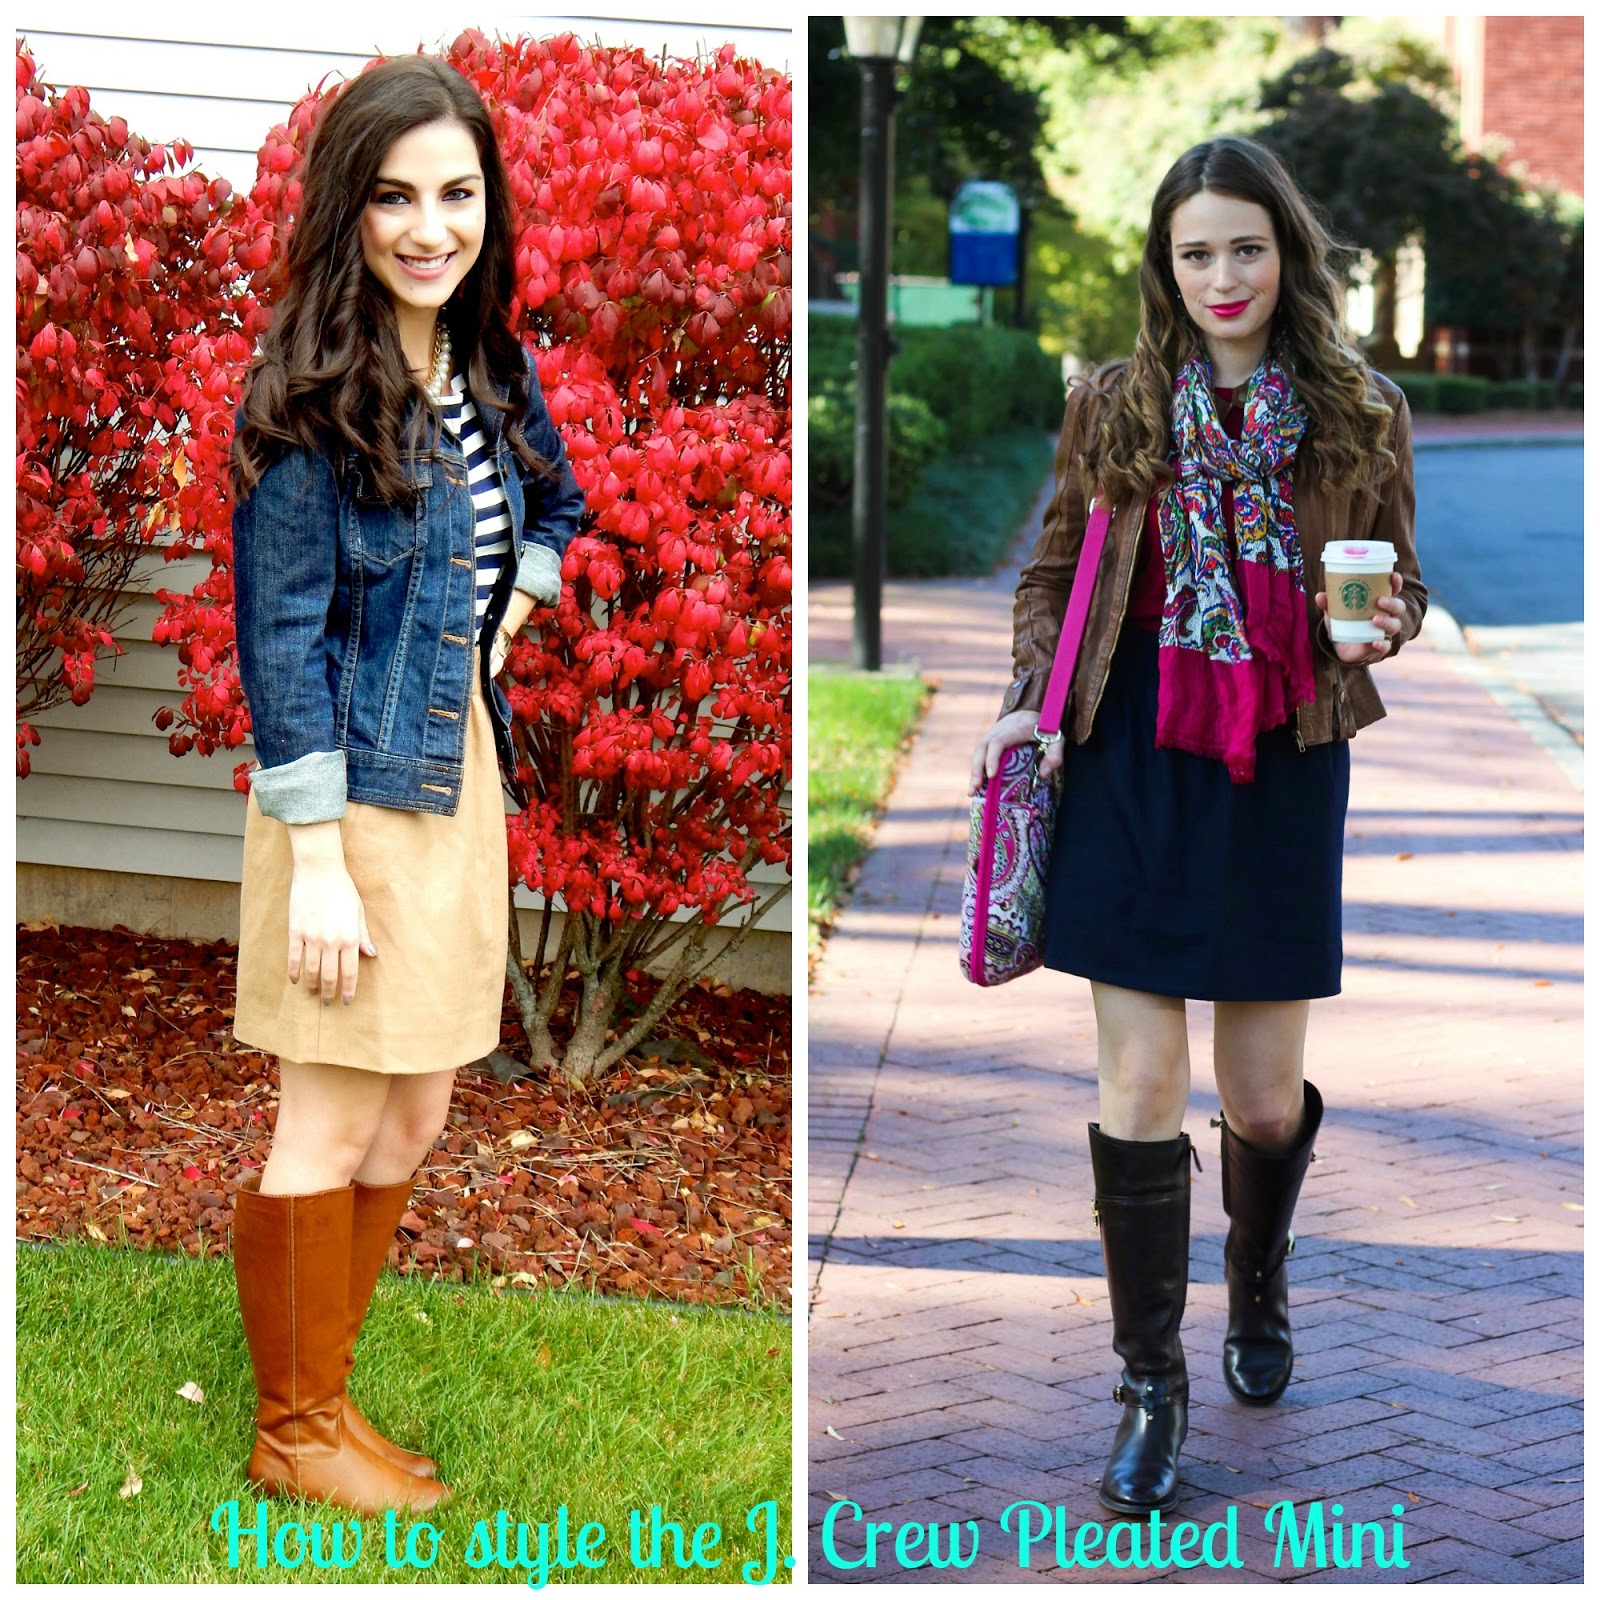 OOTD: J. Crew Pleated Mini Skirt Style Collab! | Southern Belle in Training